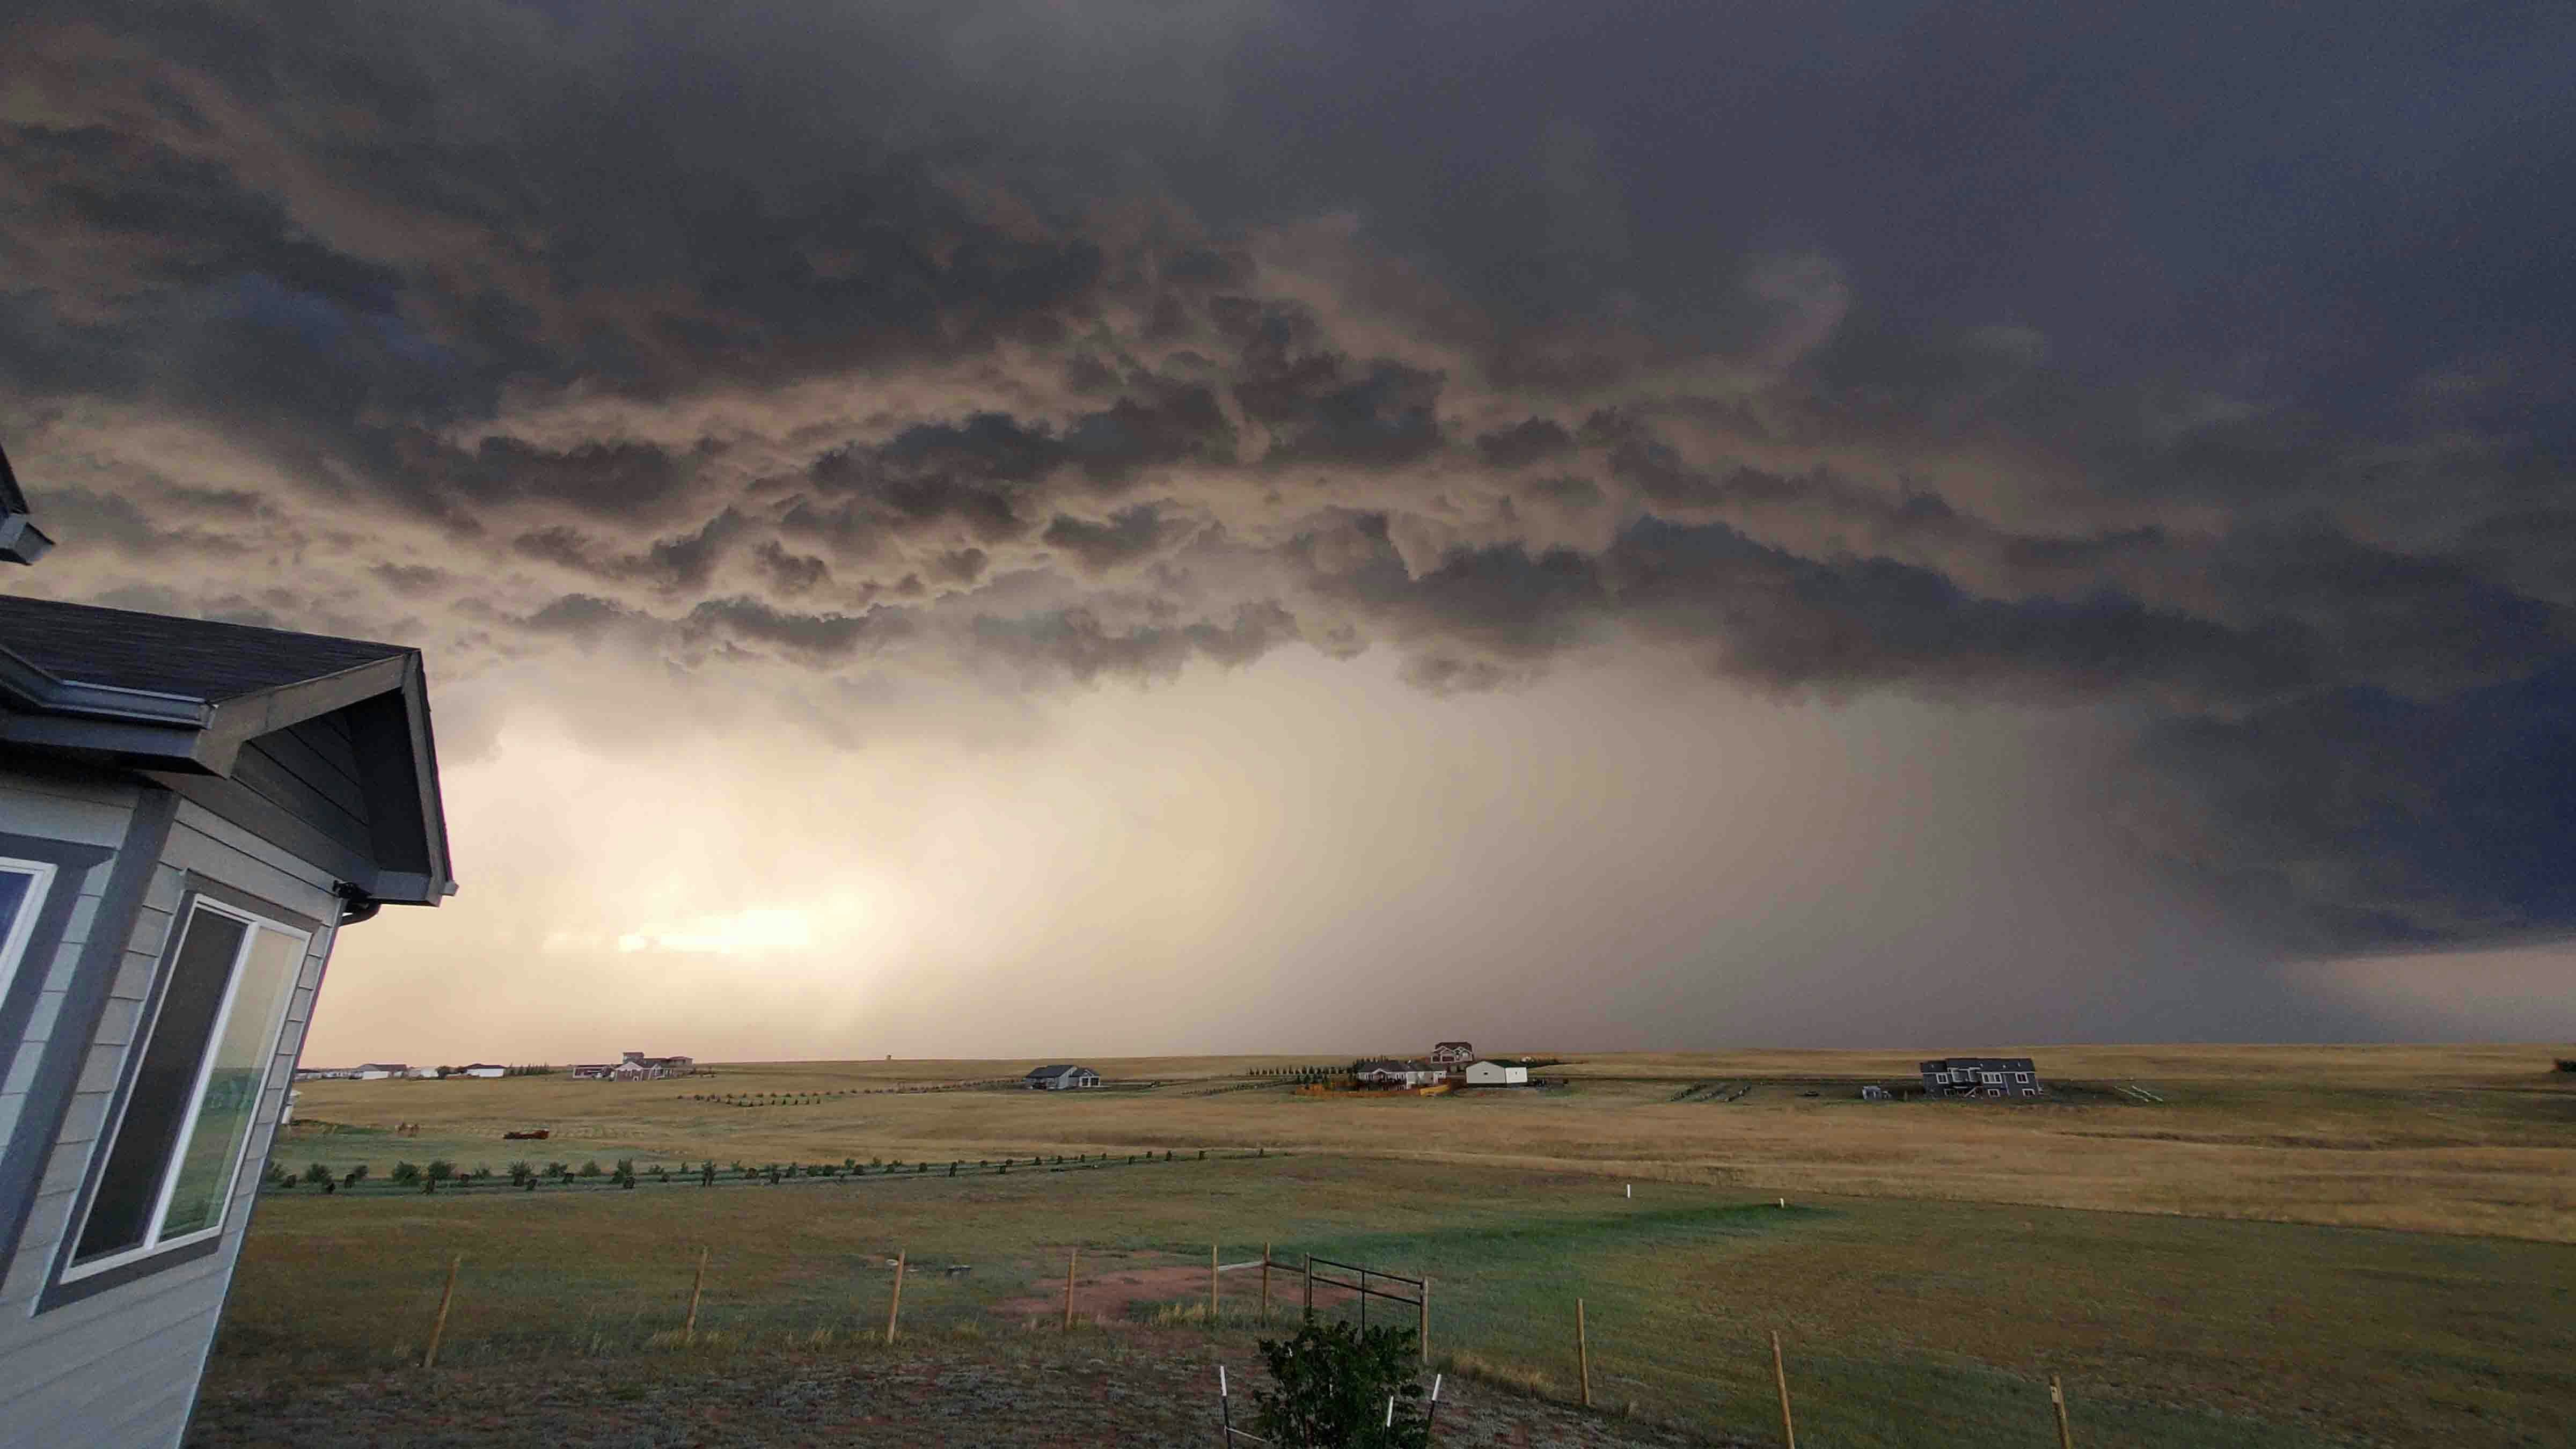 "Sunday evening, Mother Nature showed her force and beauty!!  Thankful for the precipitation and no hail!" North of Cheyenne 7 1 24